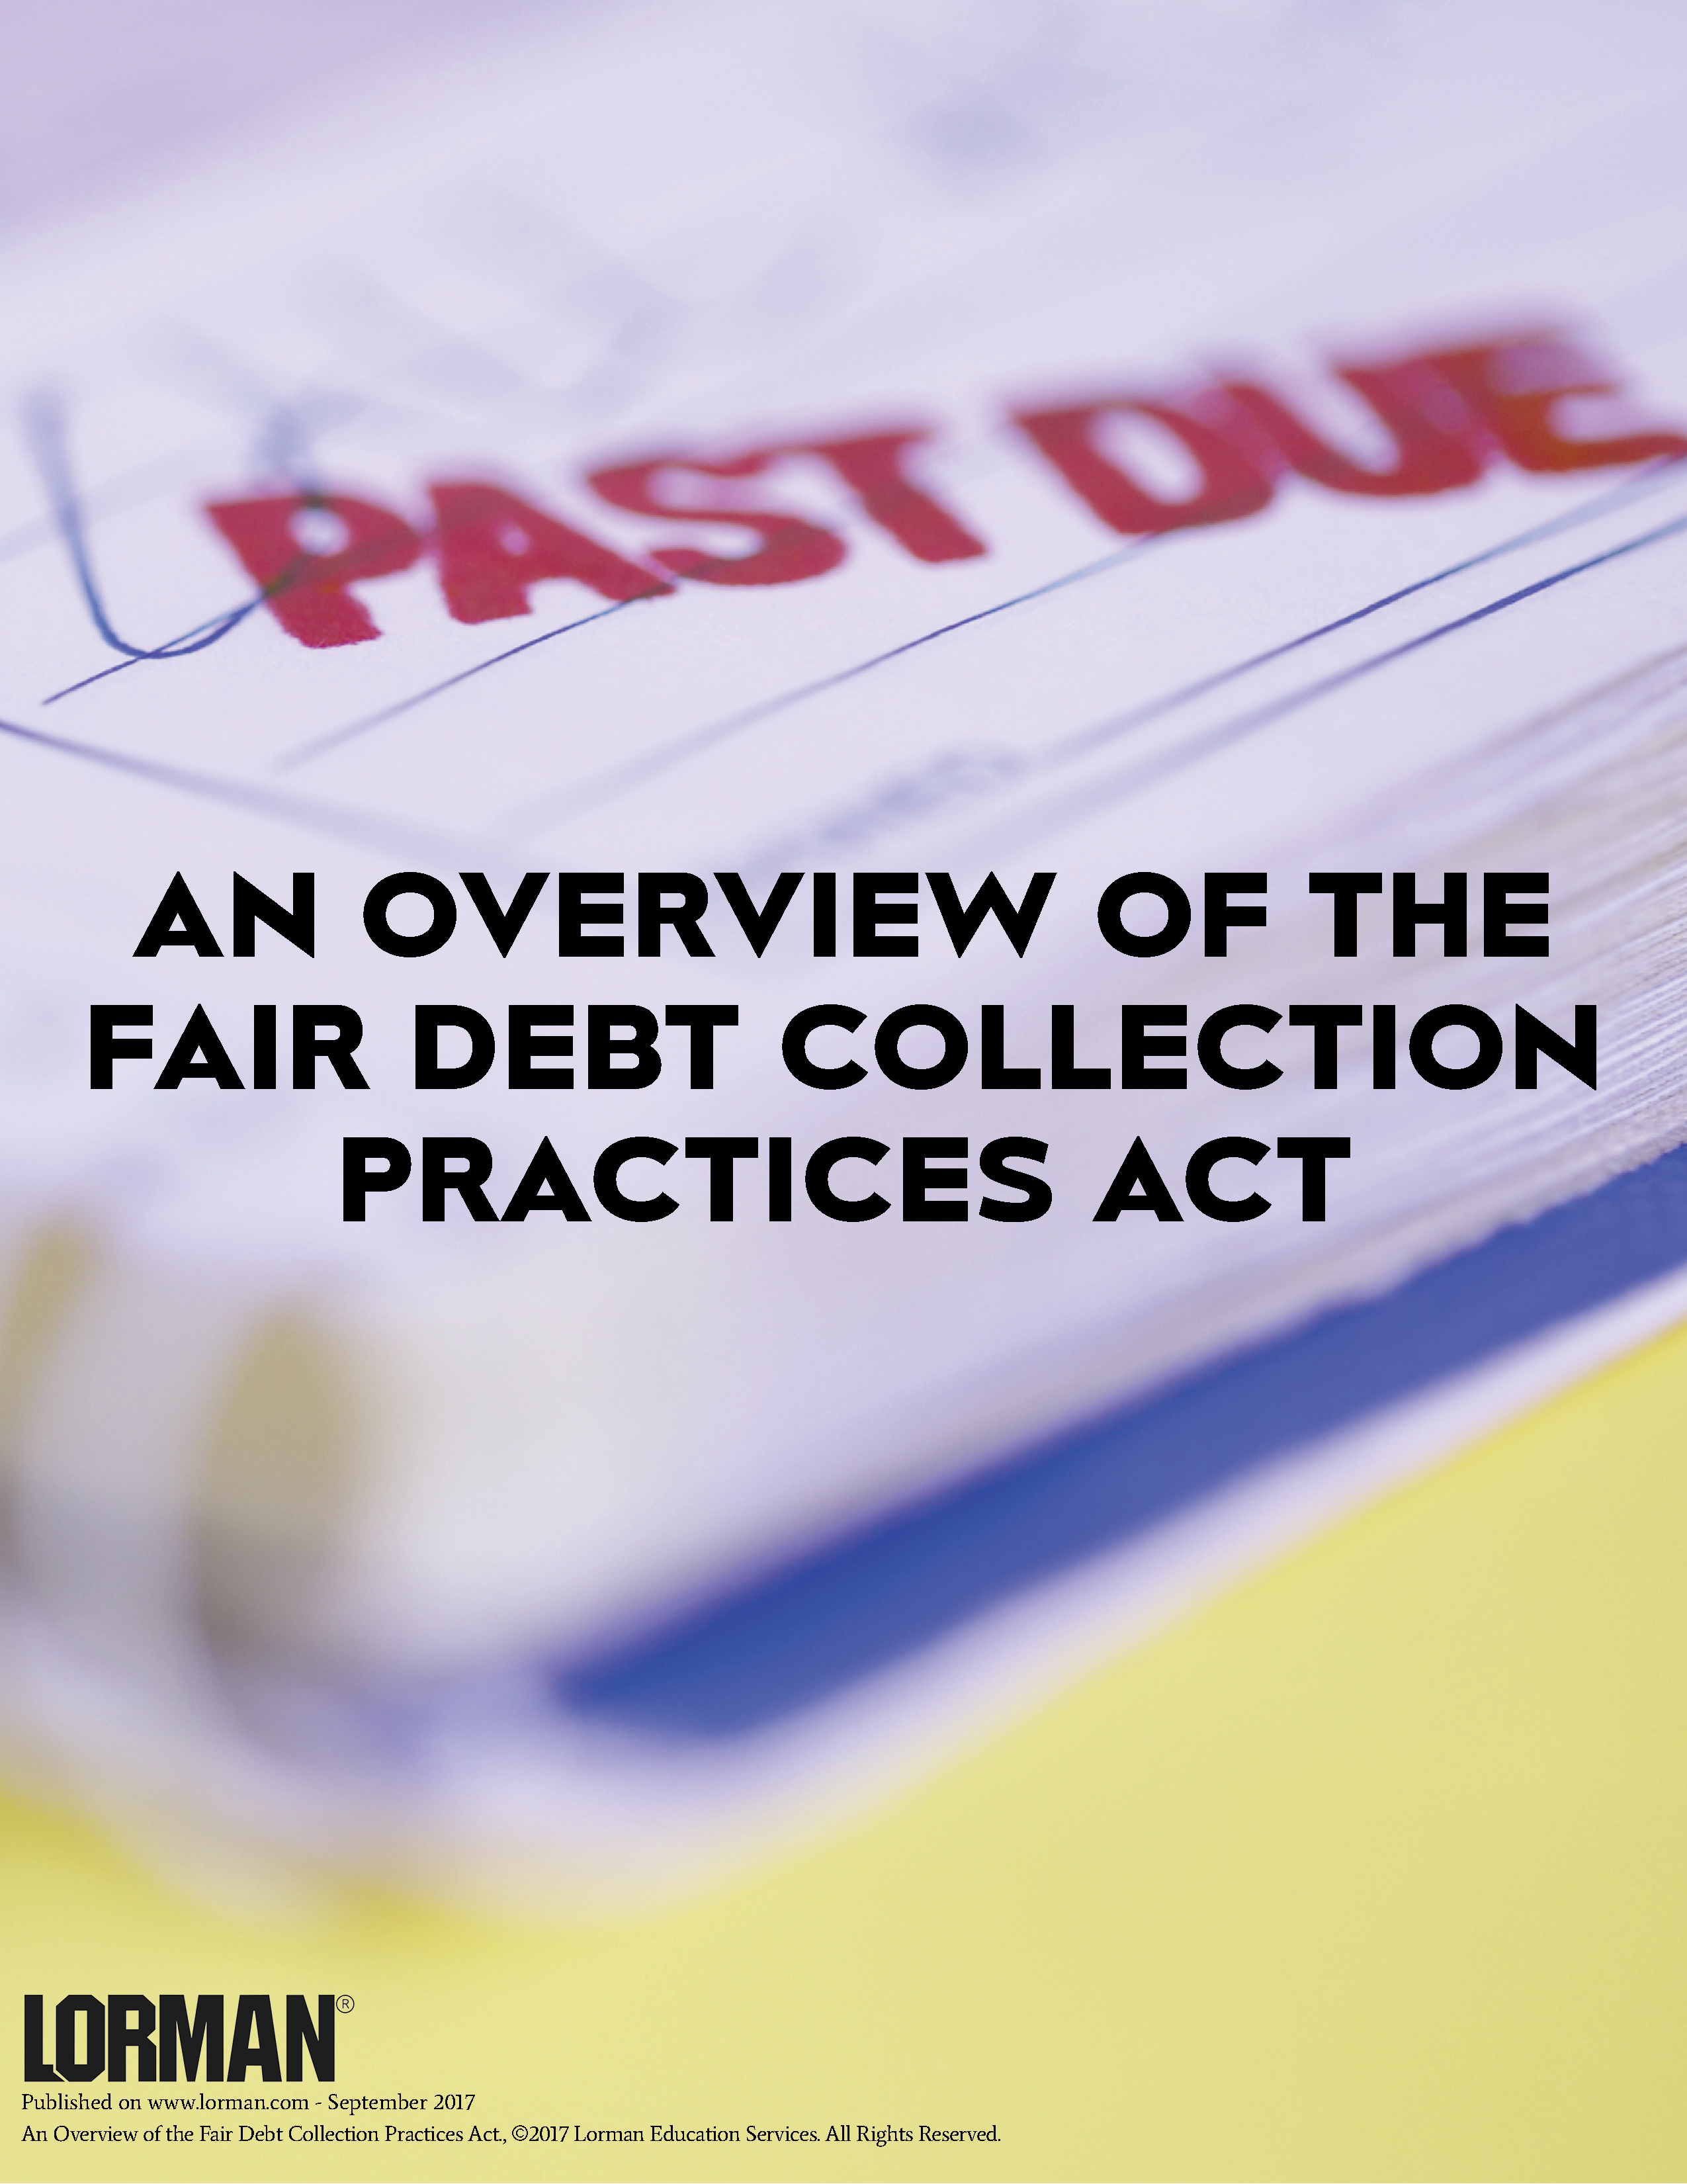 An Overview of the Fair Debt Collection Practices Act